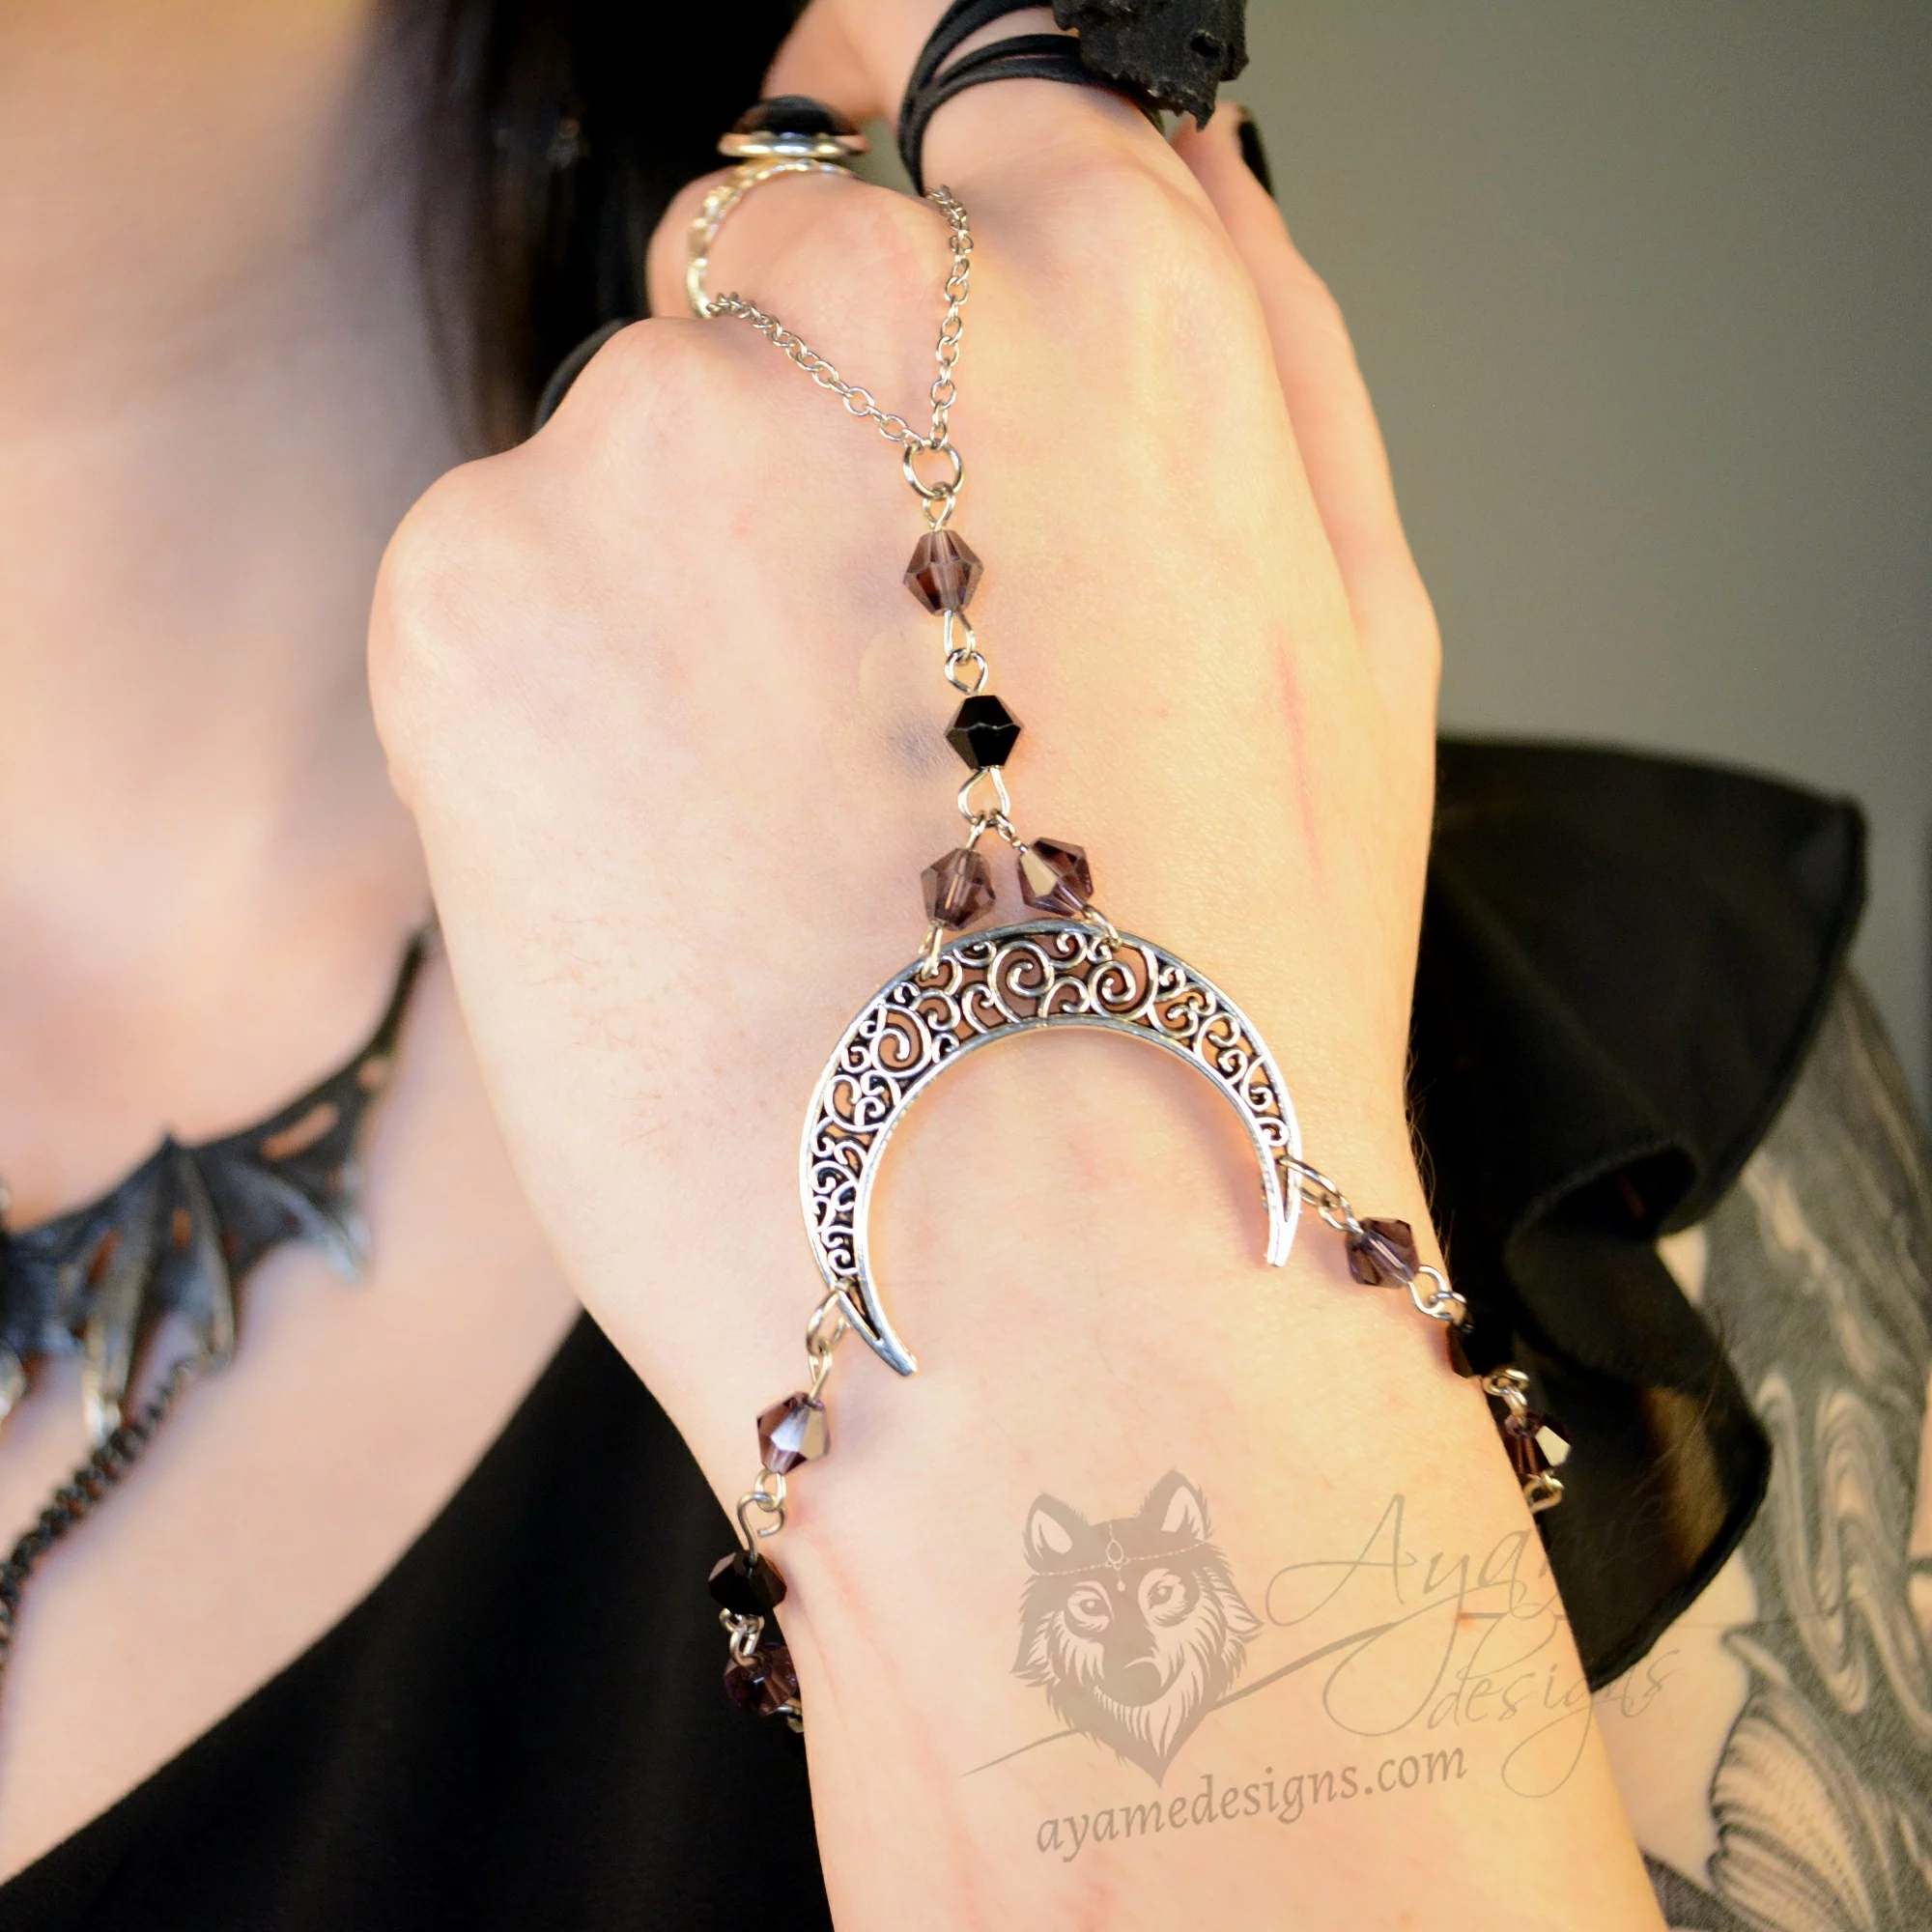 Handmade gothic hand bracelet with a filigree moon pendant, and purple and black Austrian crystal beads